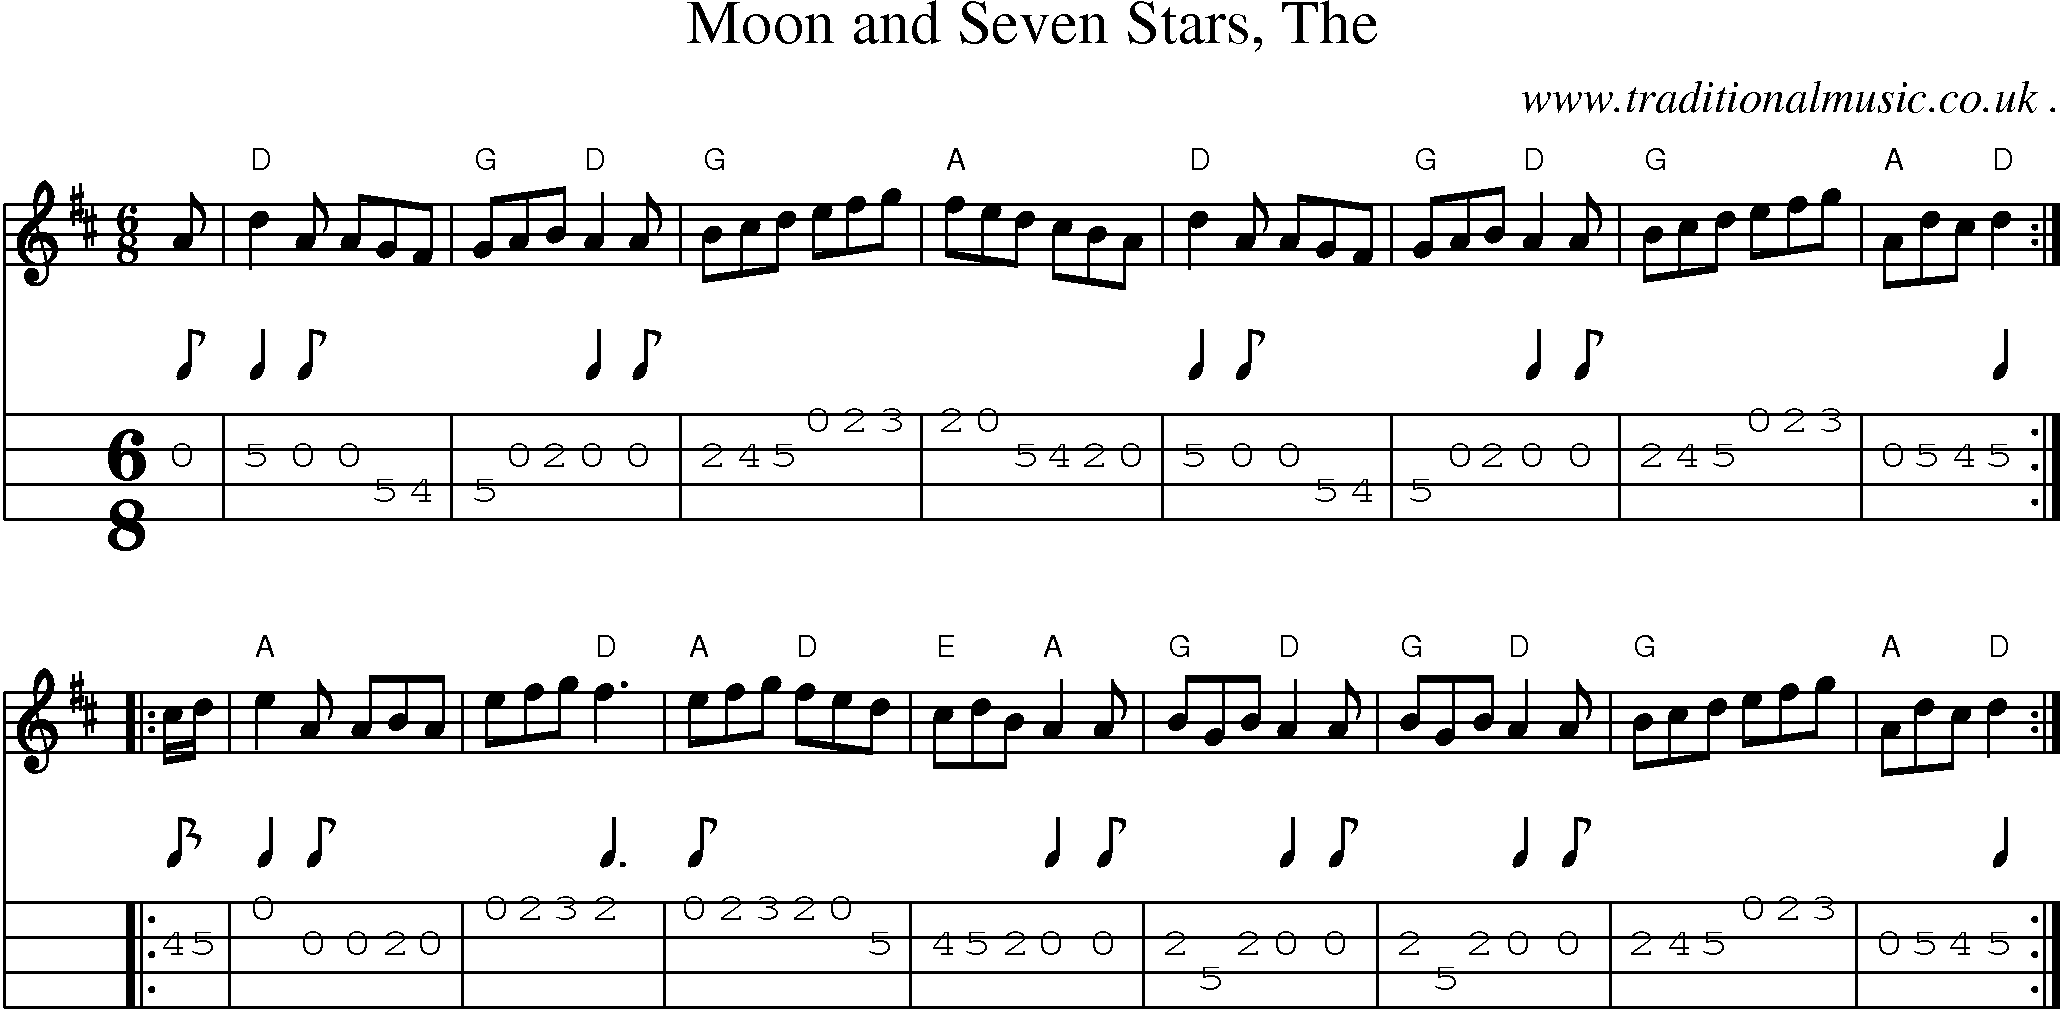 Sheet-music  score, Chords and Mandolin Tabs for Moon And Seven Stars The